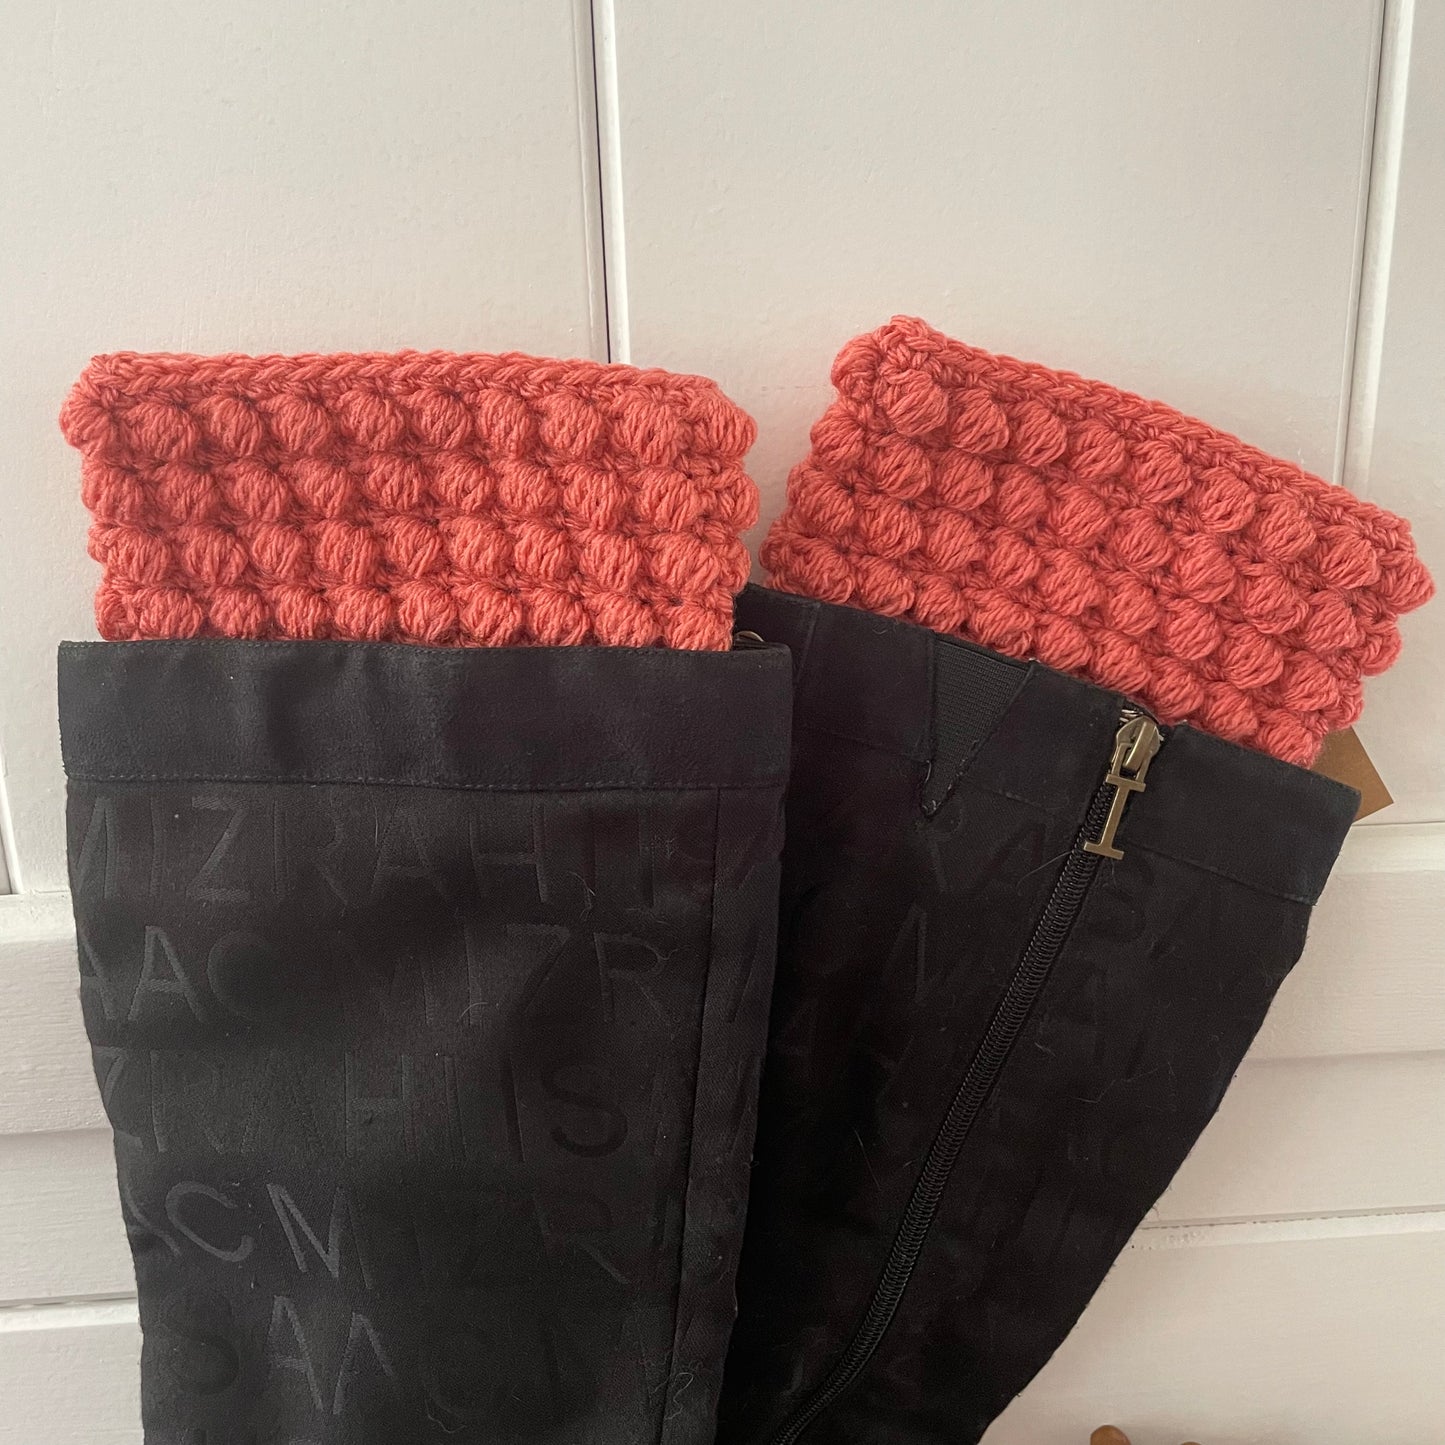 Boot Cuffs in Rusty Salmon Puff Stitch 11.5" Hand Crocheted Knit Fall Winter Hiking Indoor Outdoor Cozy Leg Warmers